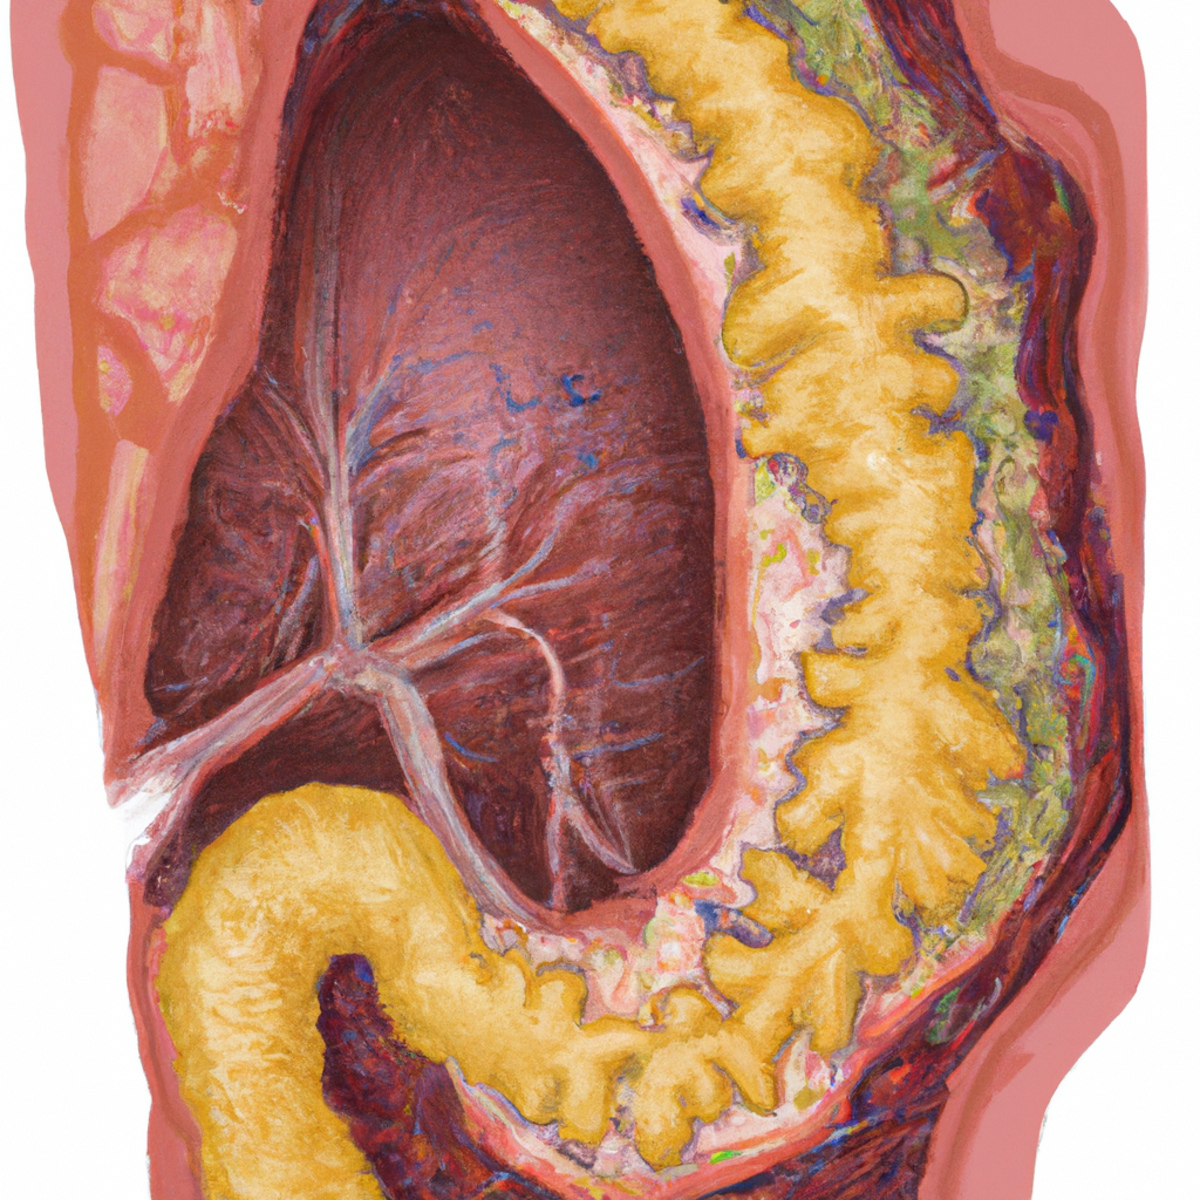 Close-up medical illustration of gallbladder agenesis, showcasing intricate anatomical structure and surrounding organs.